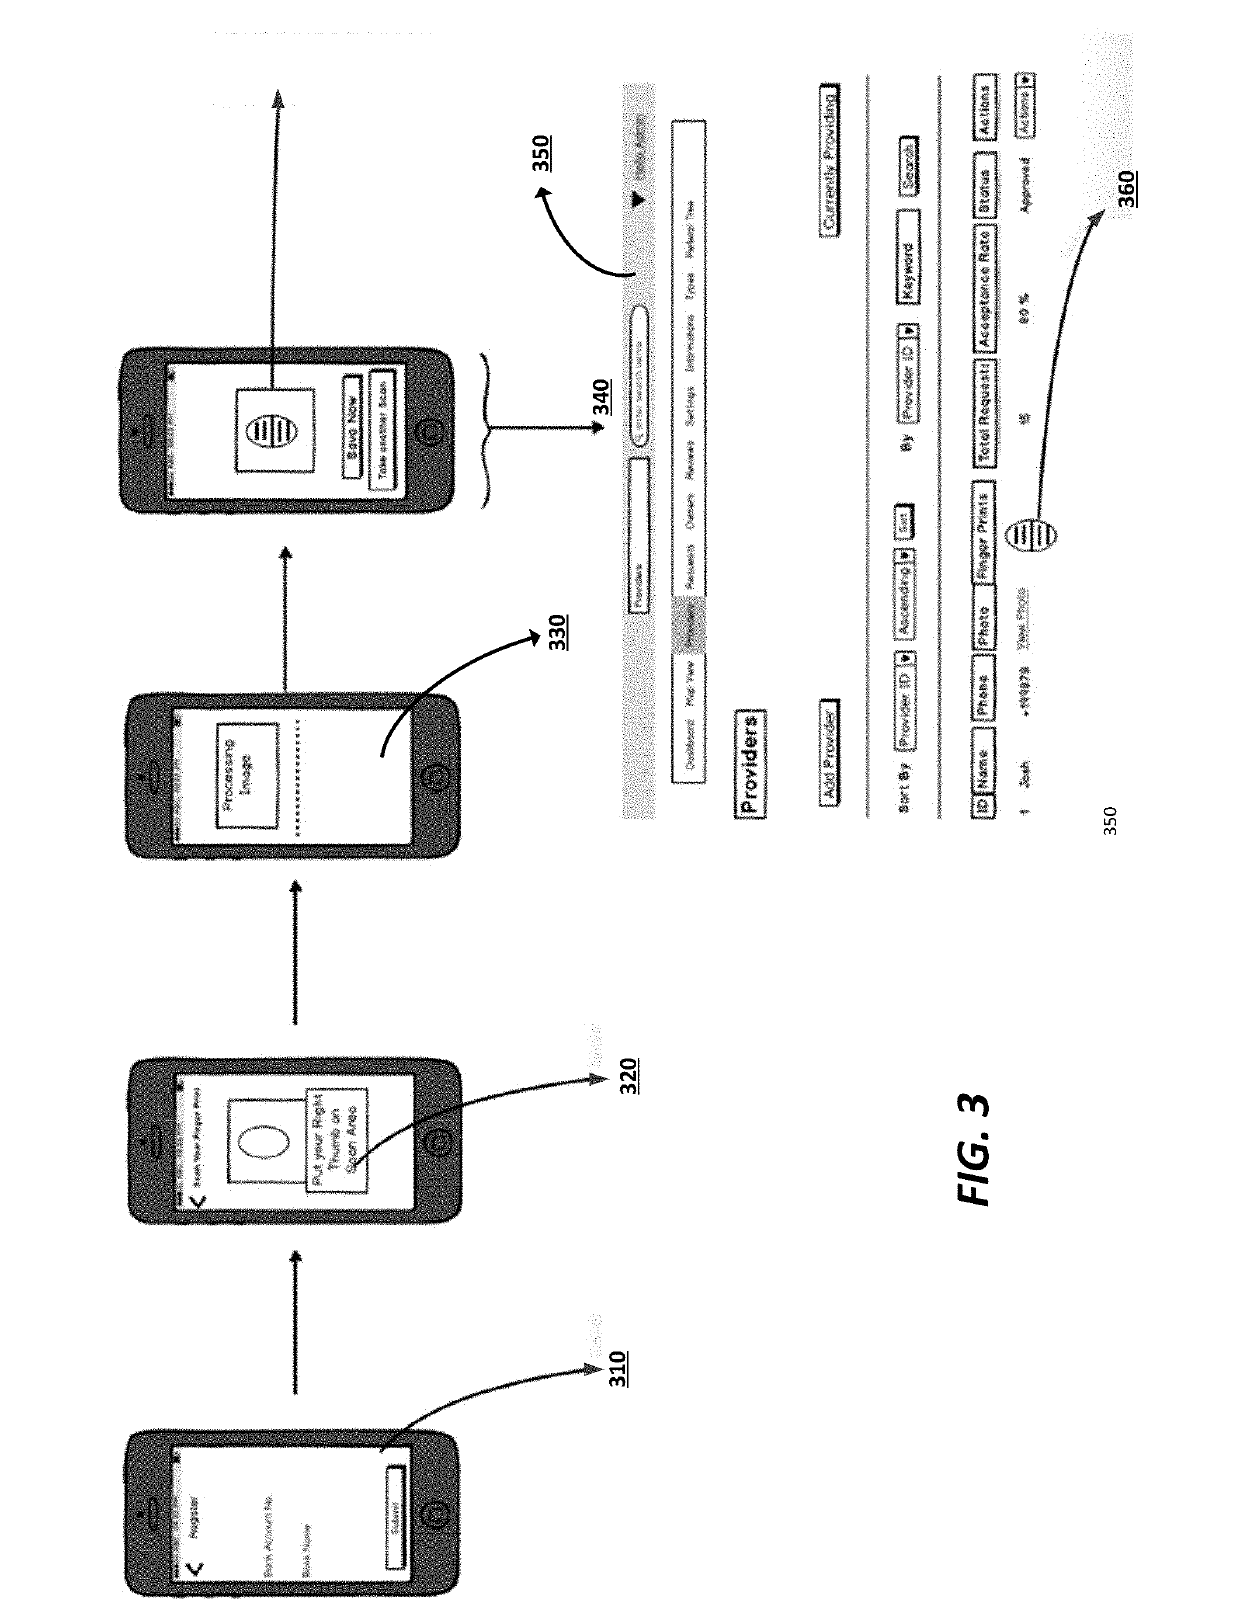 Method and system for ride shares involving hierarchical driver referrals